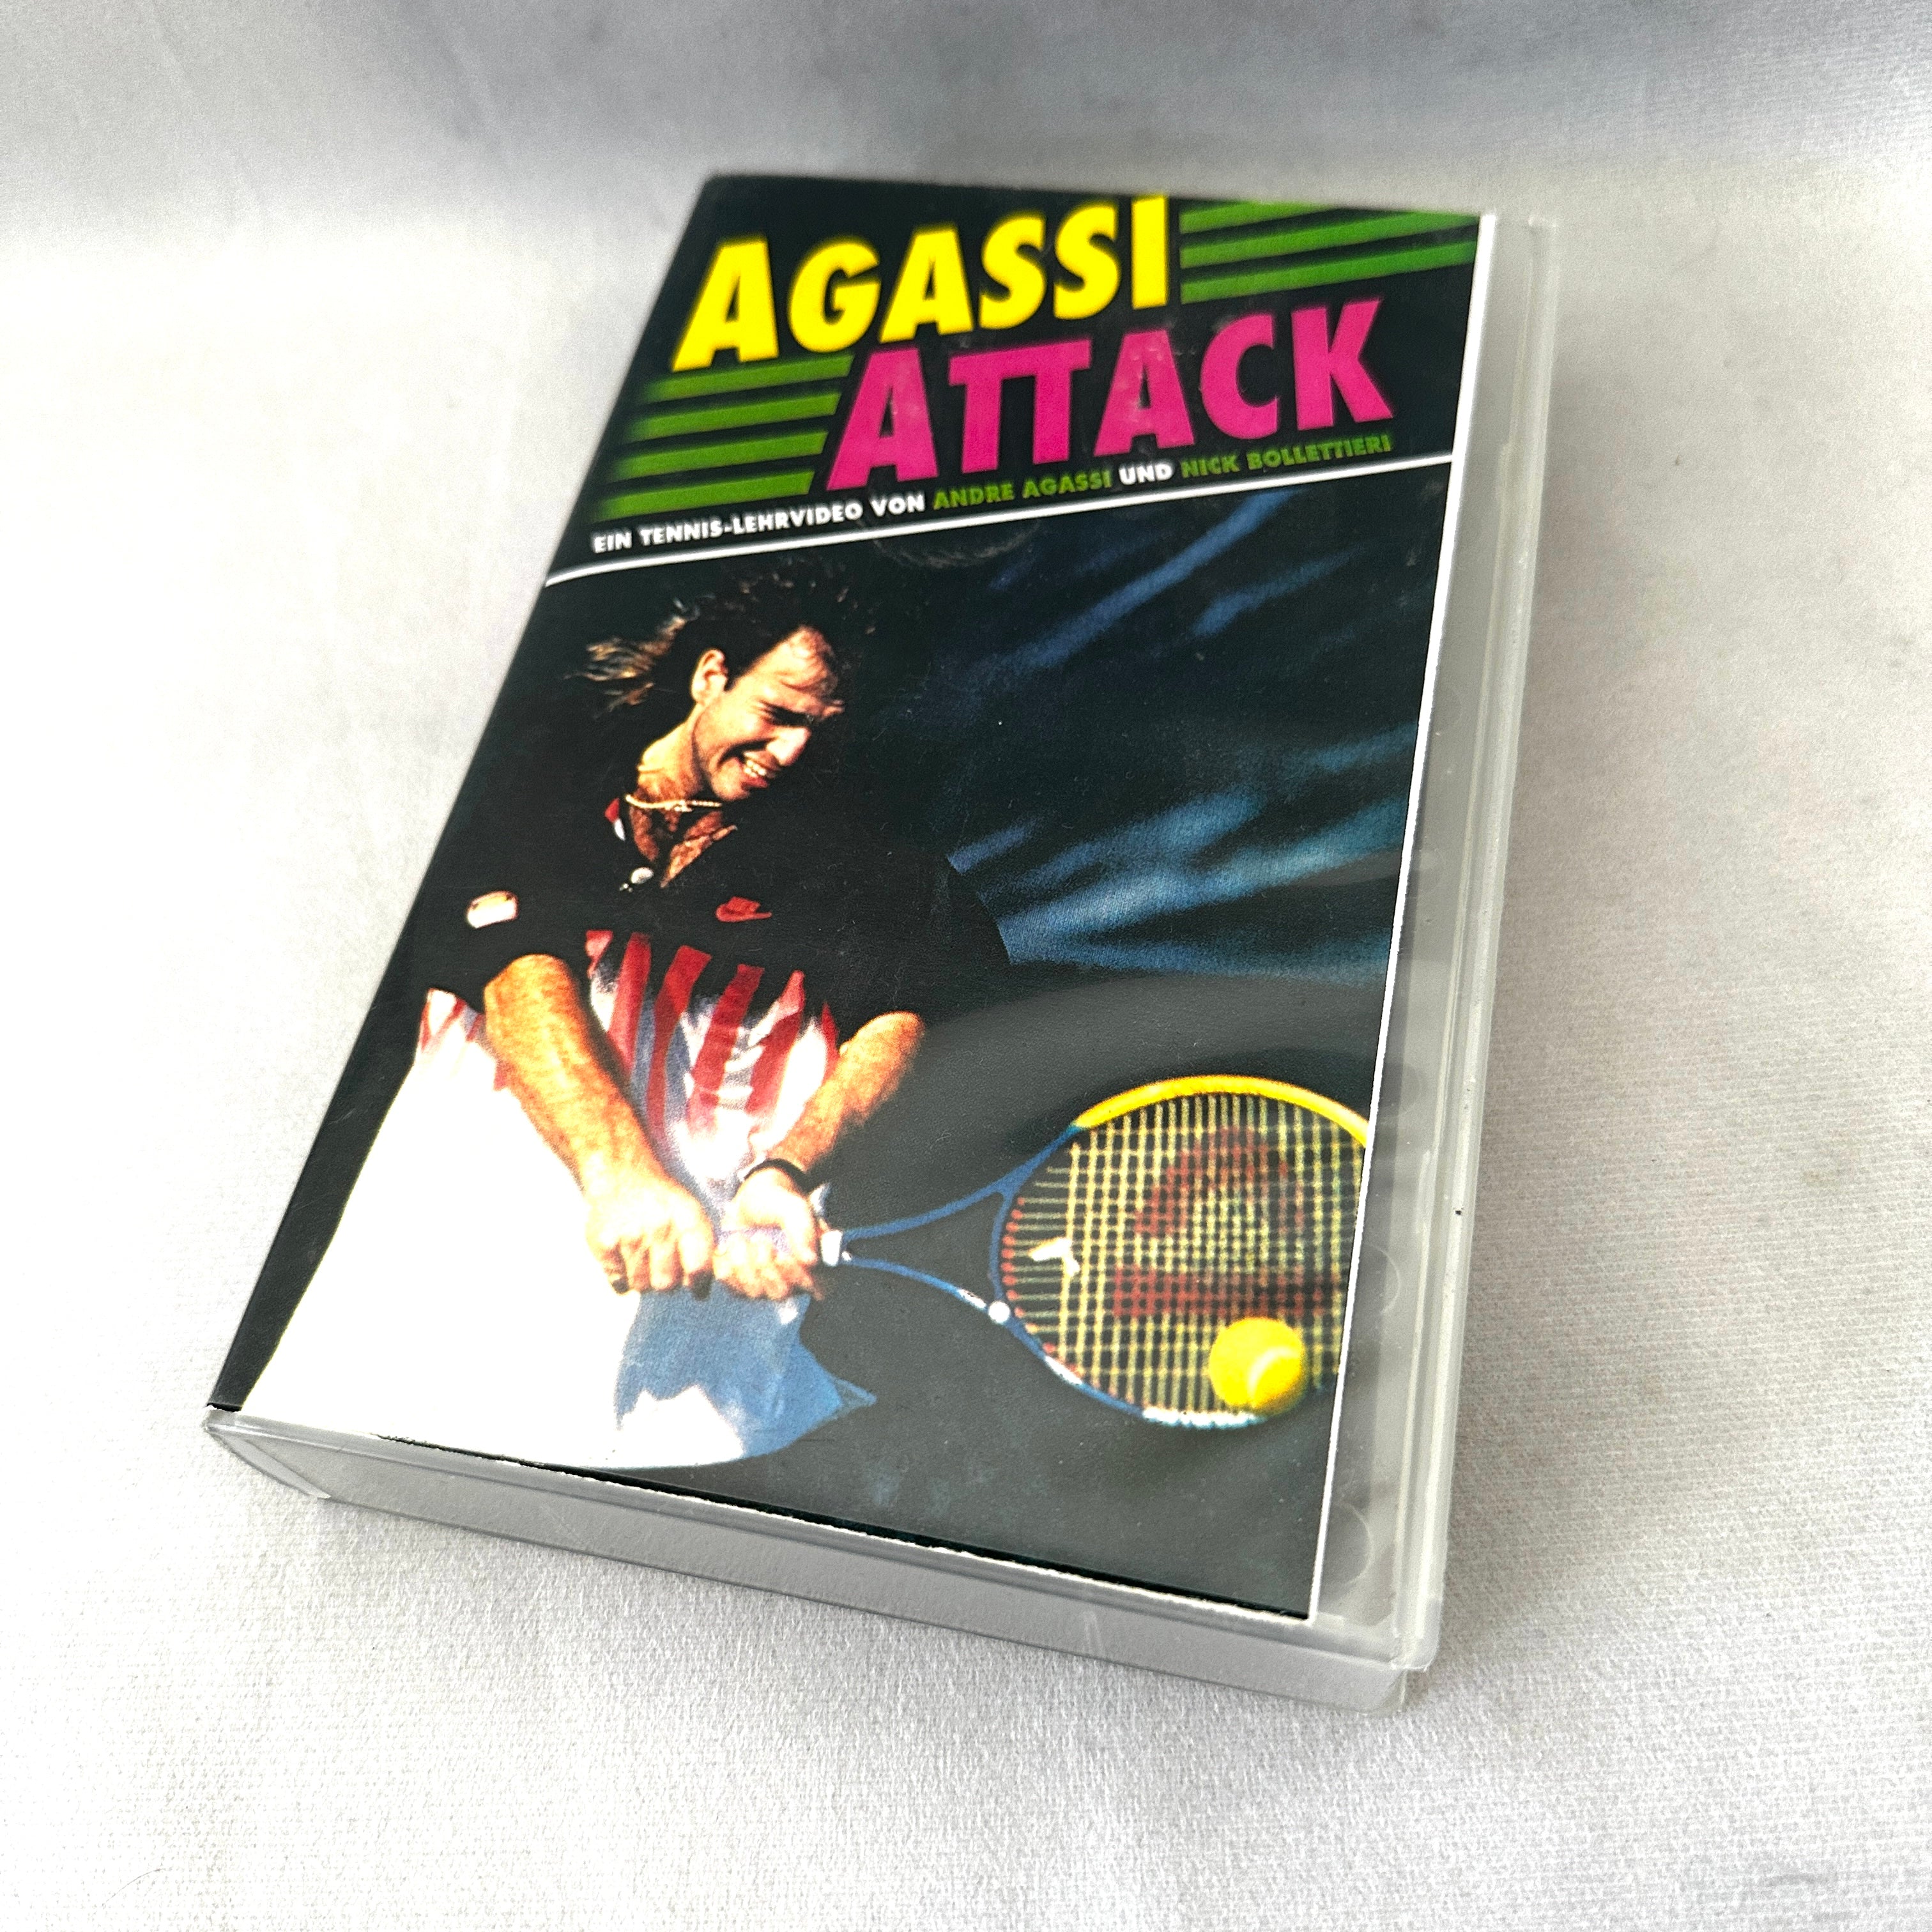 Andre Agassi Attack Nick Bollettieri Tennis Training VHS Video Tape 19